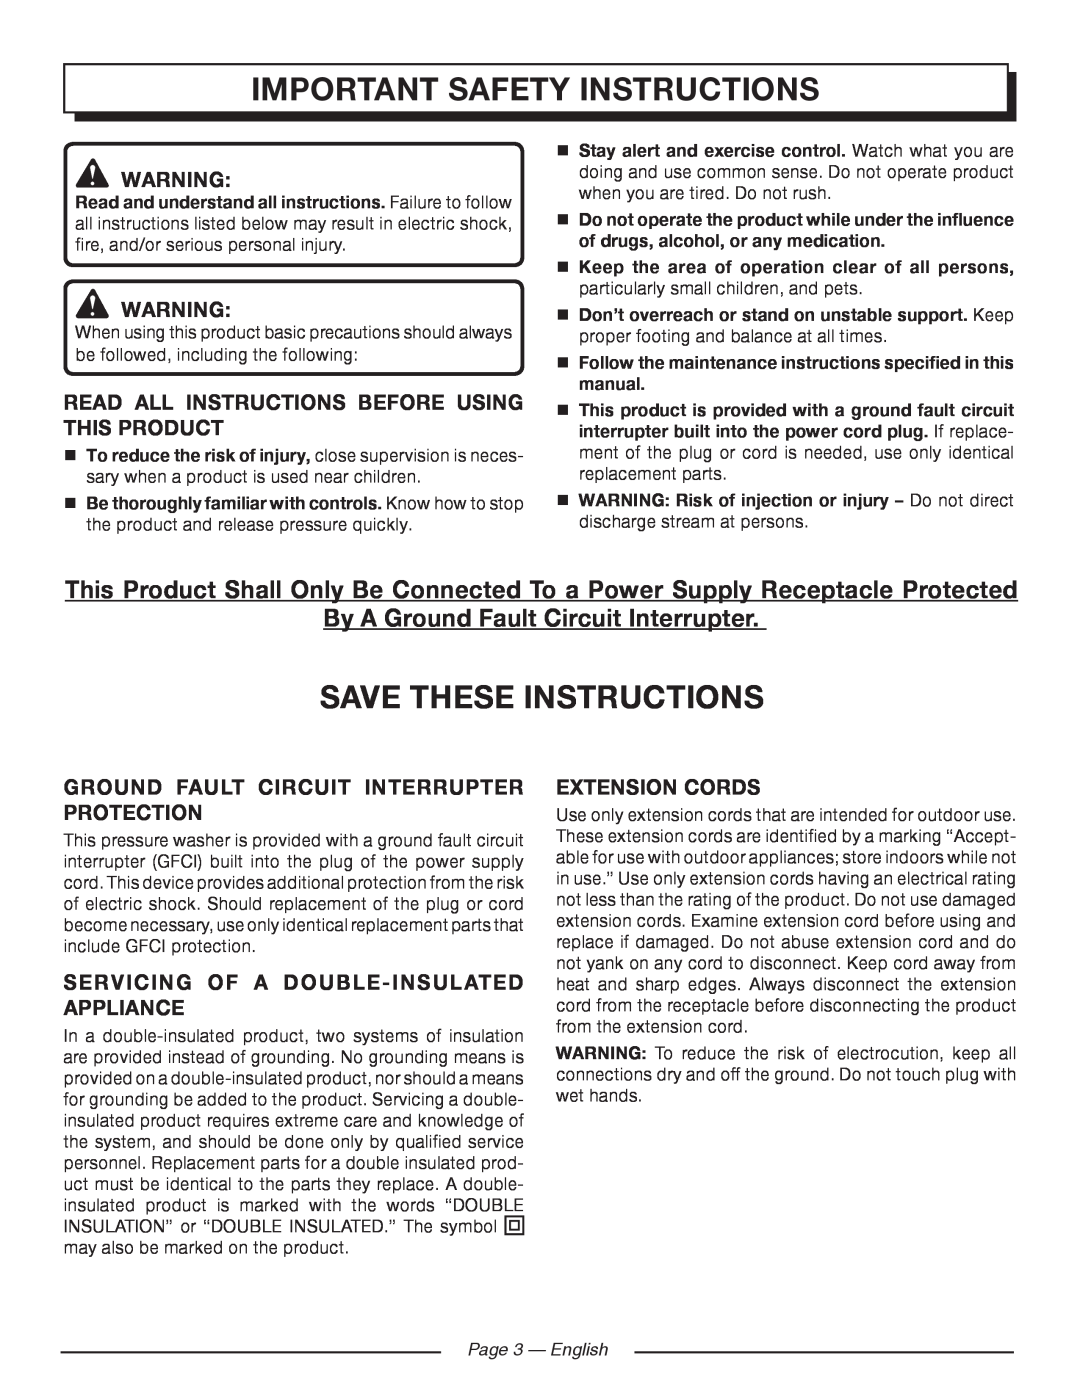 Homelite UT80720 Important Safety Instructions, Save These Instructions, By A Ground Fault Circuit Interrupter 